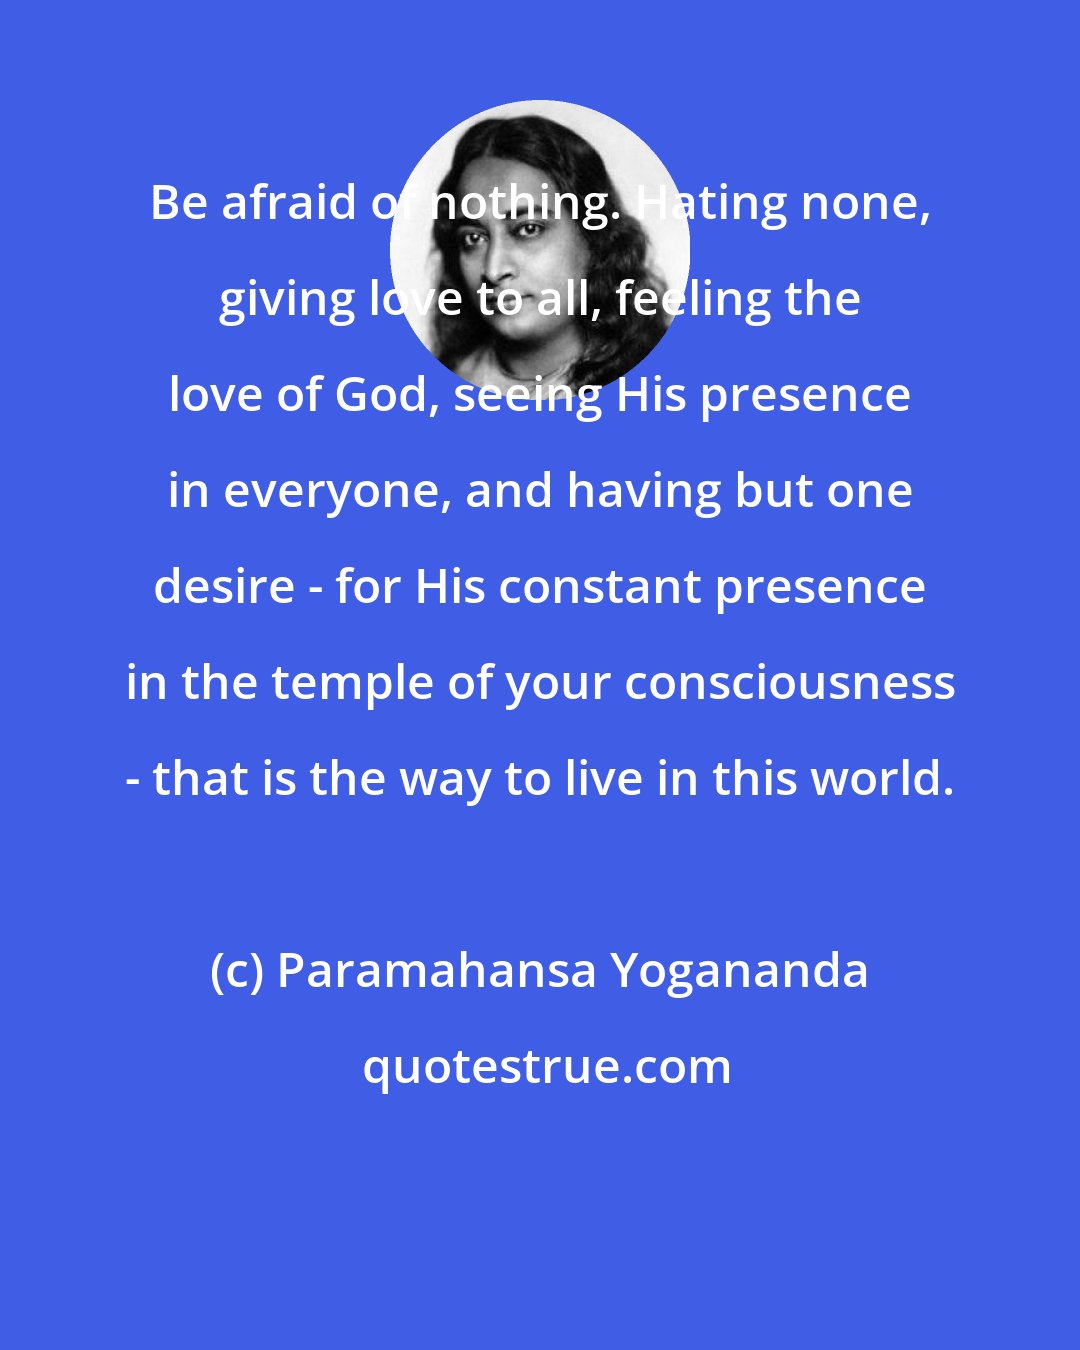 Paramahansa Yogananda: Be afraid of nothing. Hating none, giving love to all, feeling the love of God, seeing His presence in everyone, and having but one desire - for His constant presence in the temple of your consciousness - that is the way to live in this world.